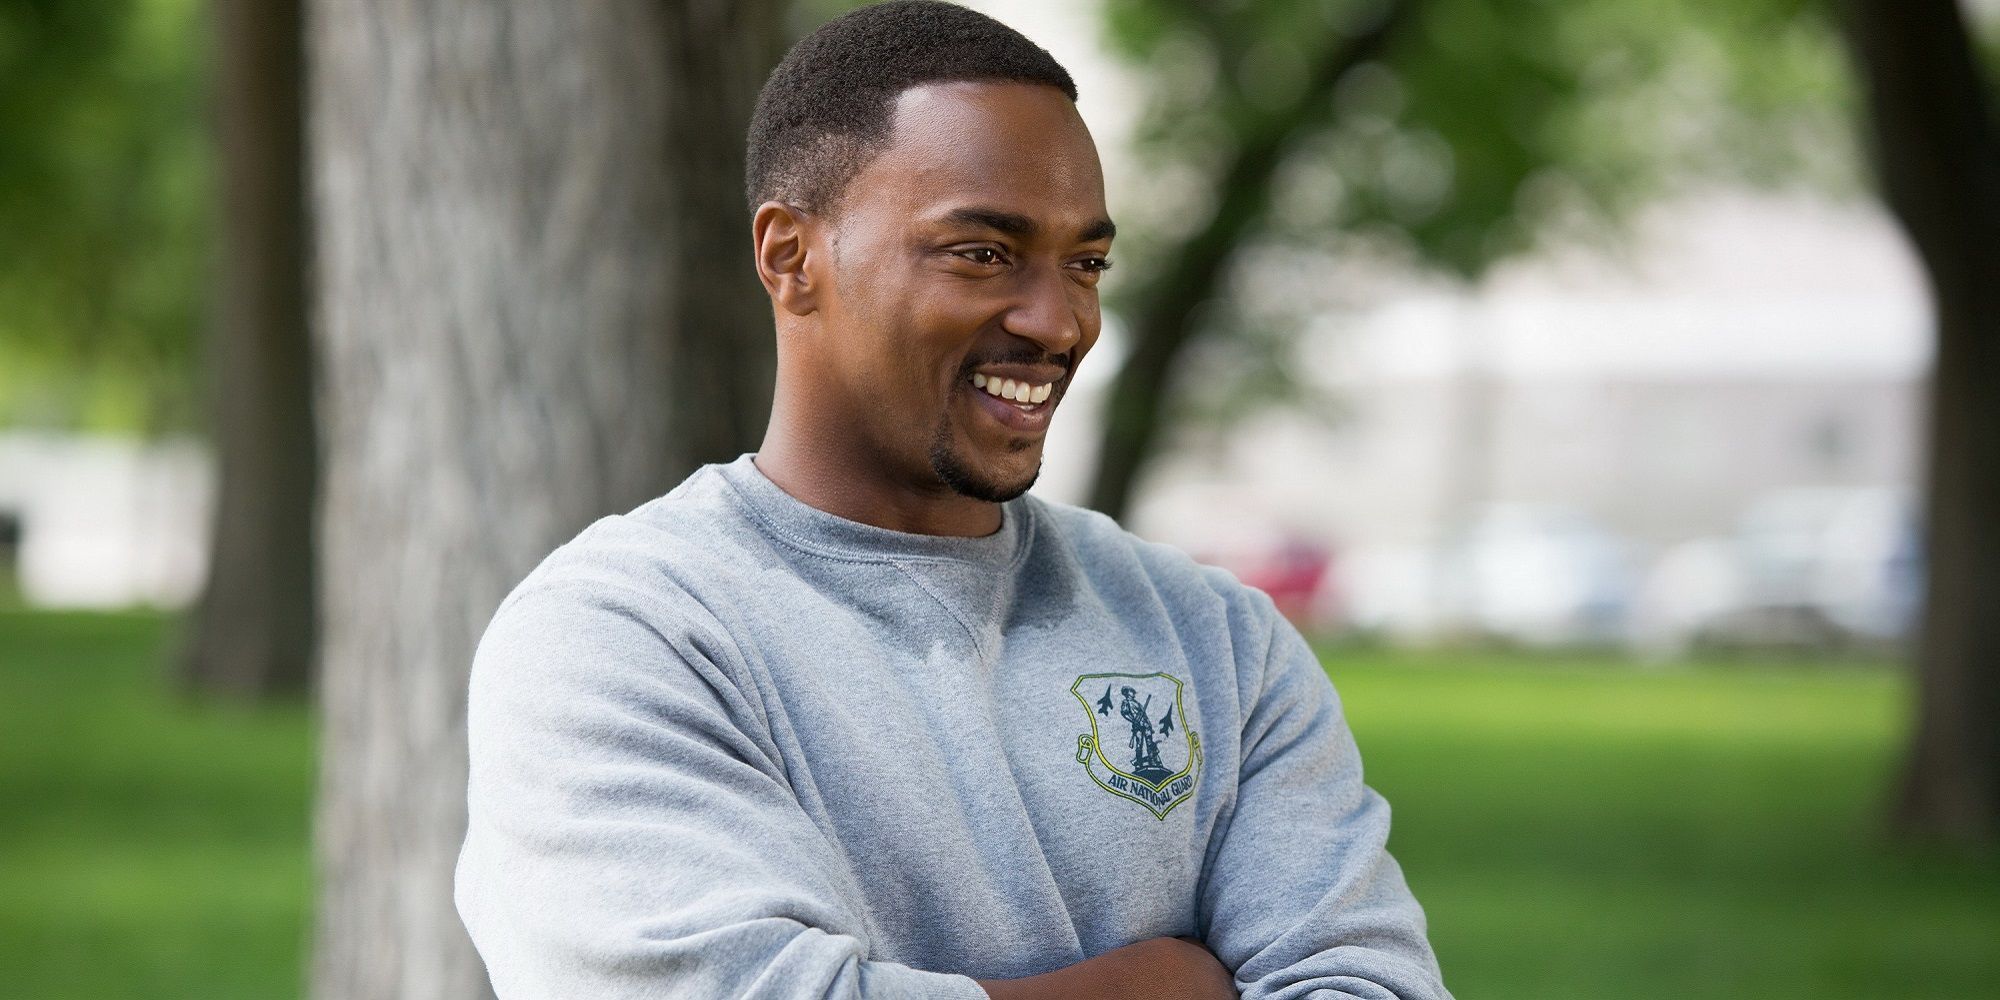 Anthony Mackie as Sam Wilson in Winter Soldier